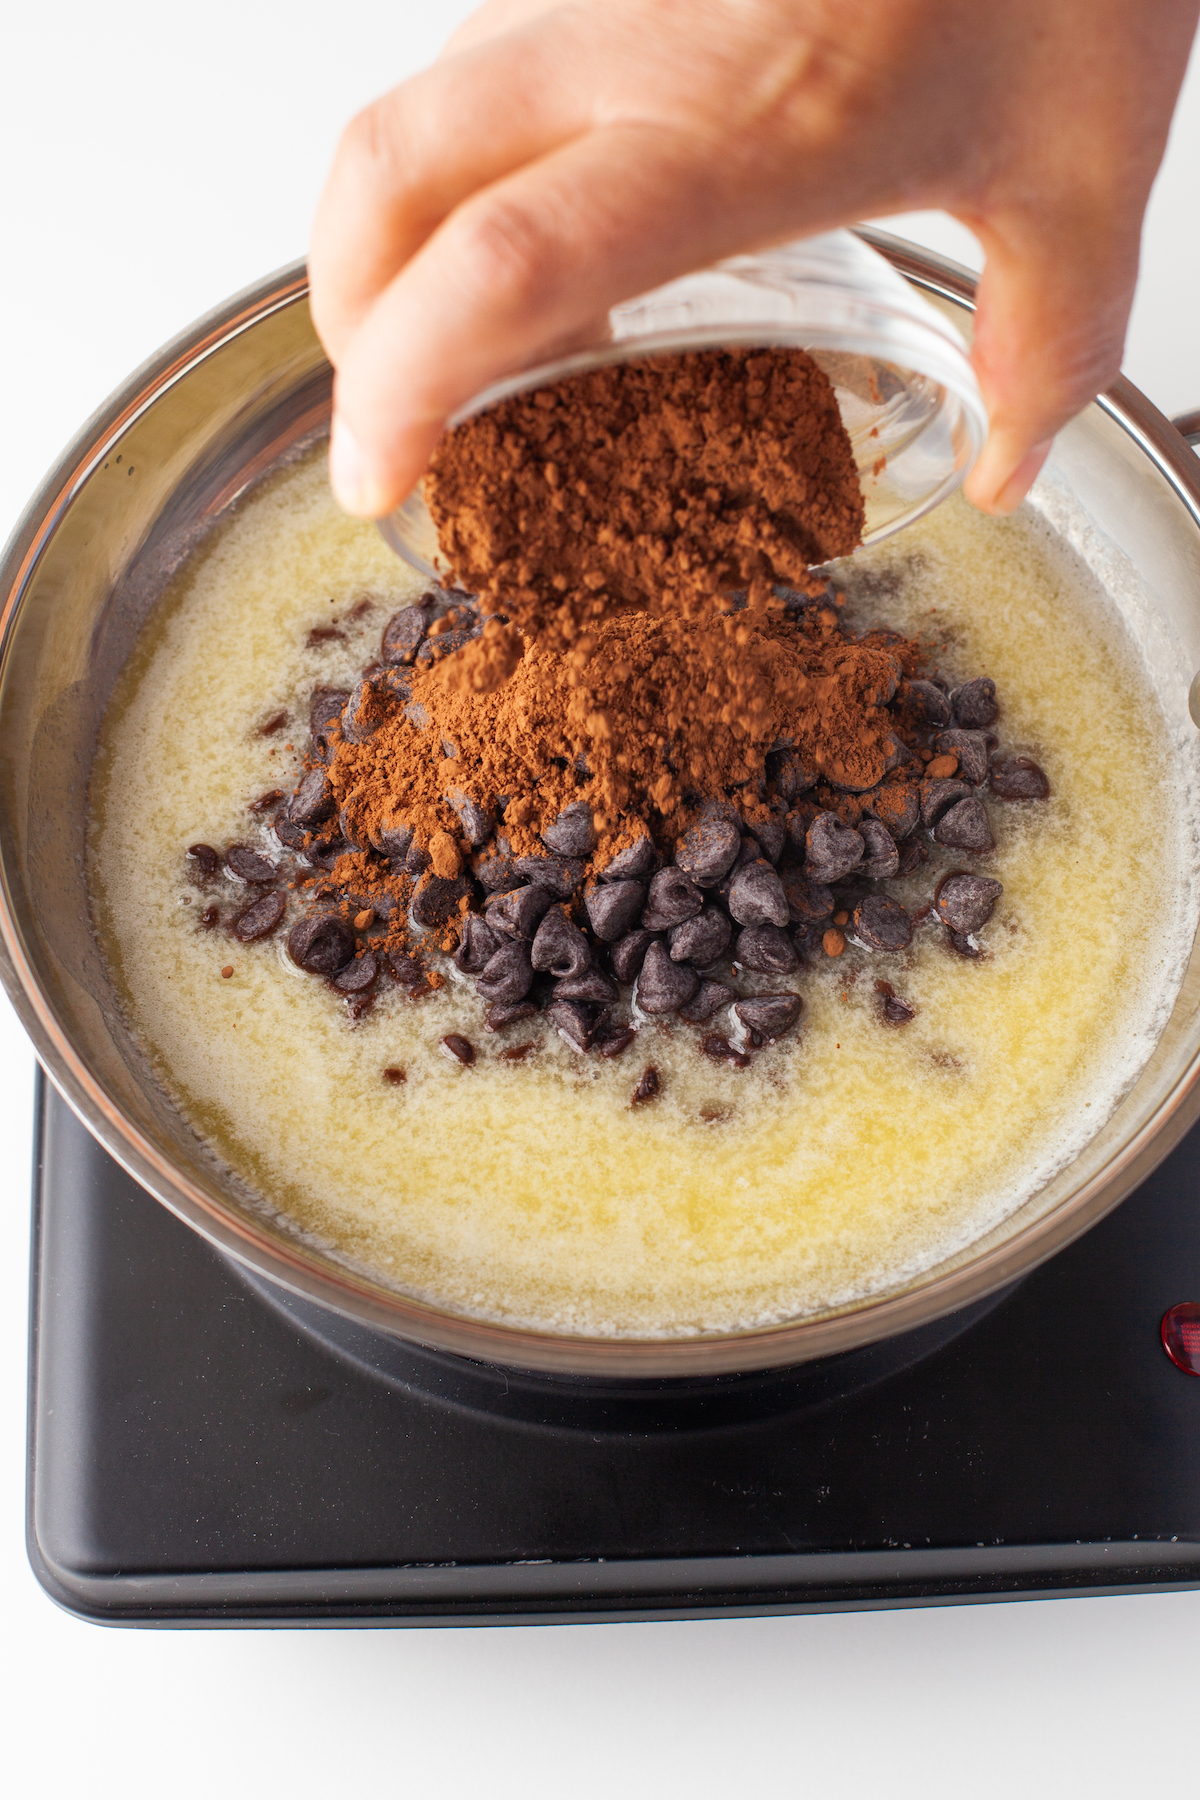 Chocolate chips melting in butter with cocoa powder being added